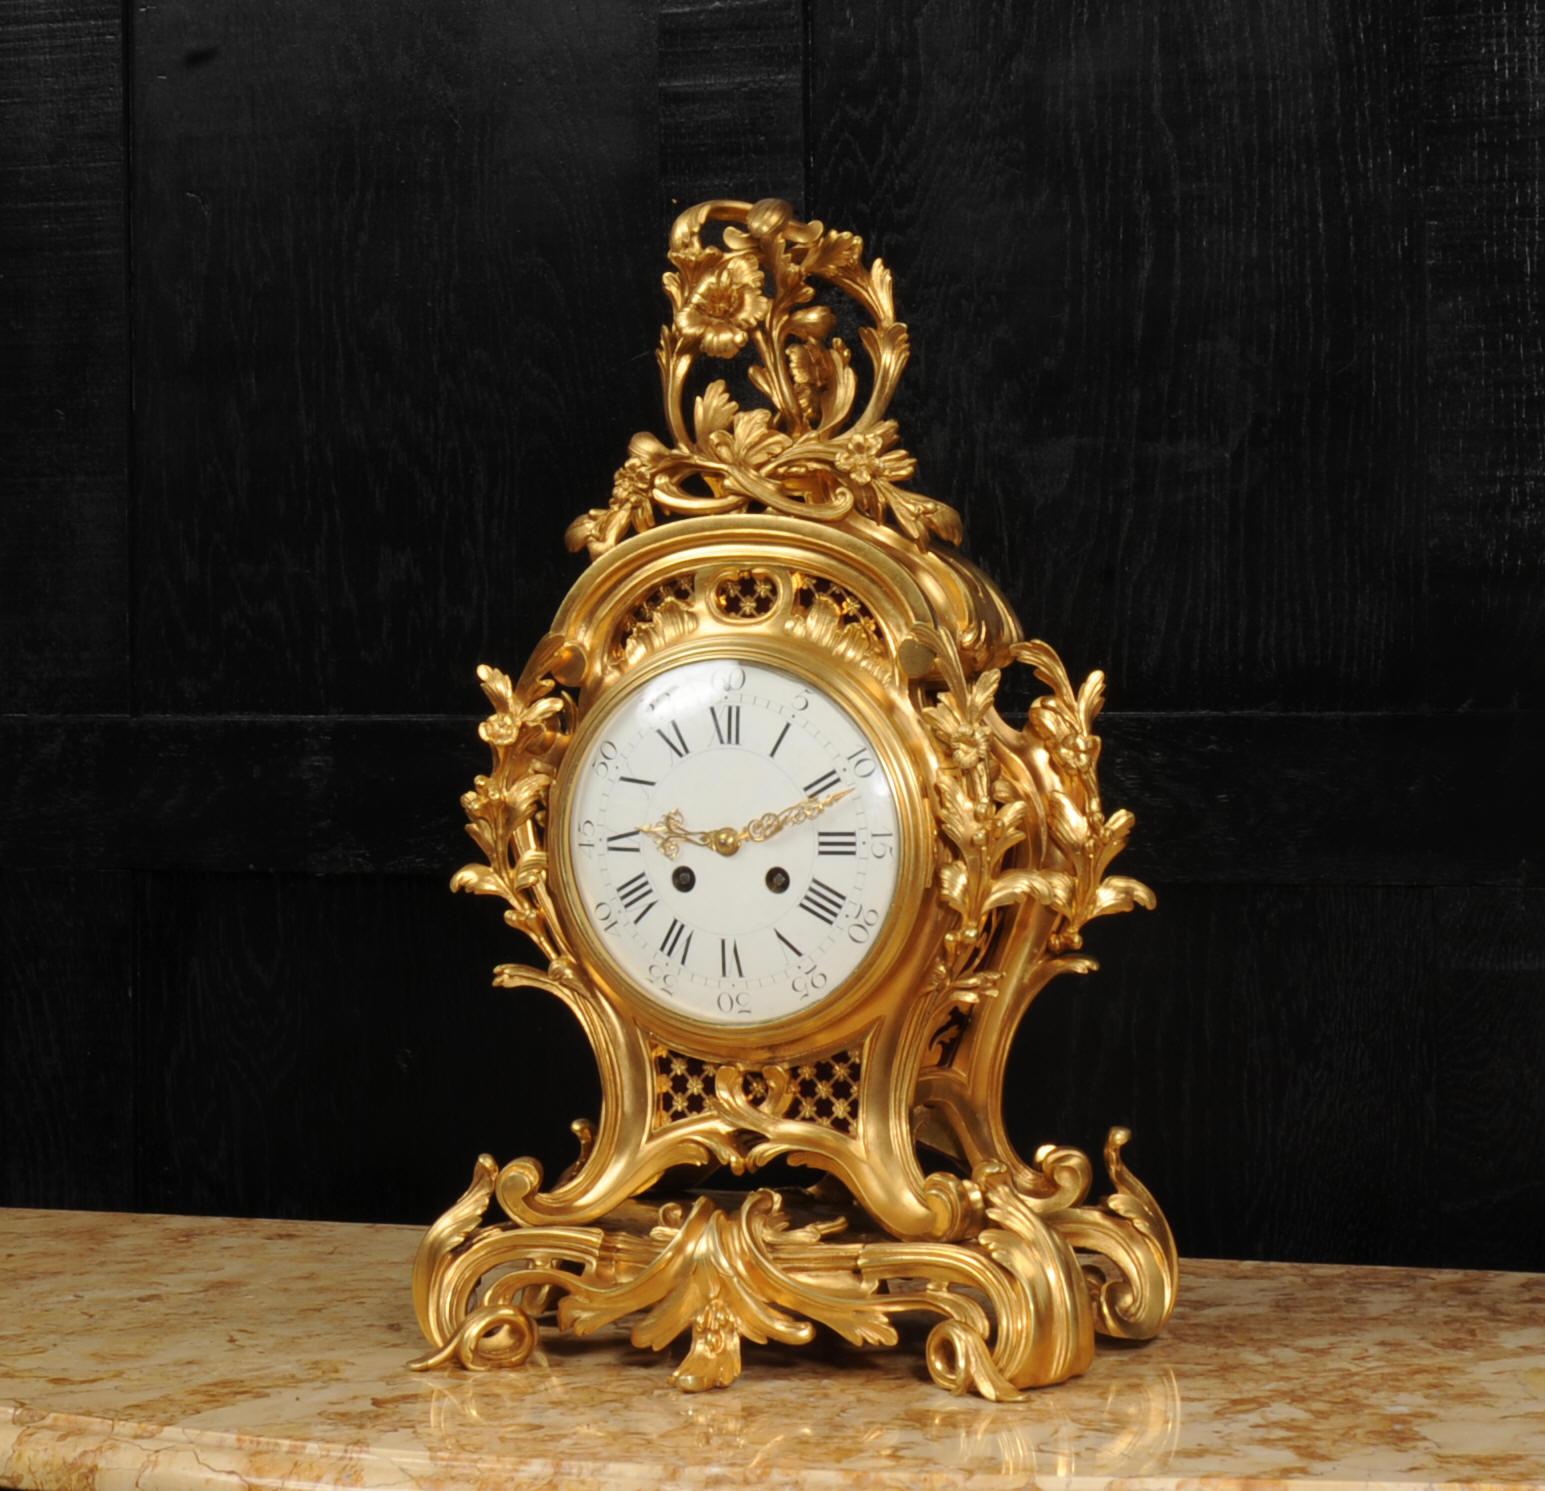 A substantial and very fine quality ormolu Rococo clock by Samuel Marti. Formed in finely gilded bronze, bold, sinuous scrolls and curves form the case with delicately modelled floral and foliate decoration. It stands on an integral naturalistically